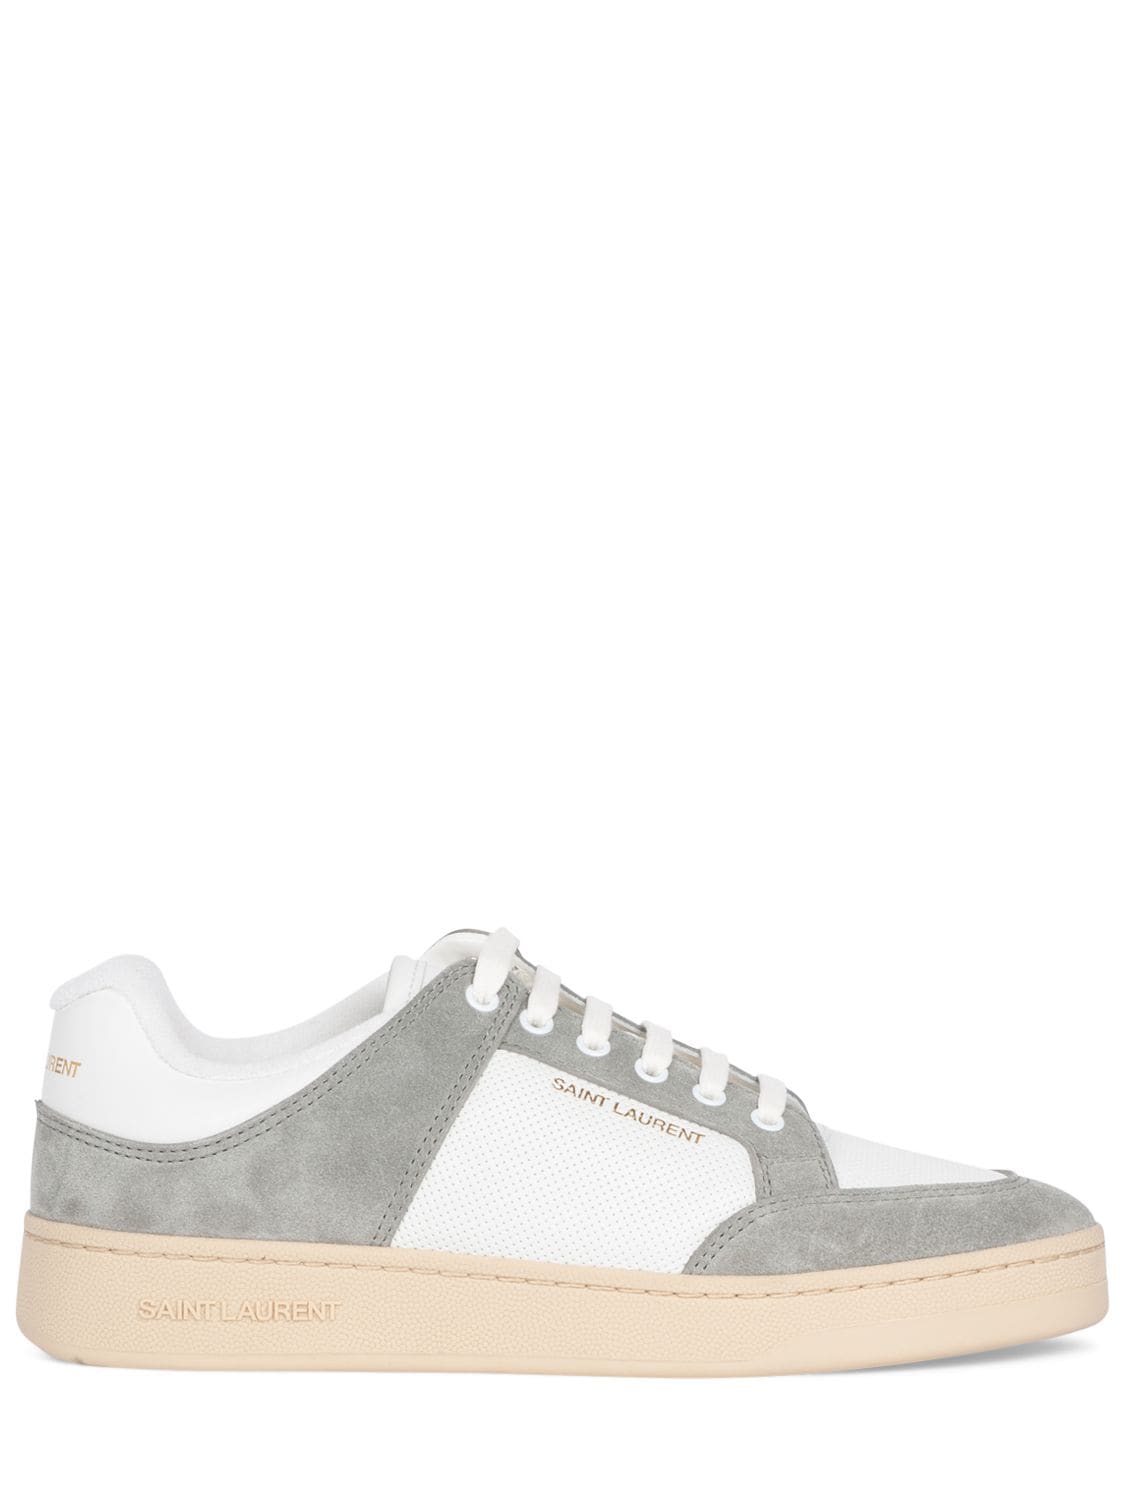 Shop Saint Laurent Sl/61 Leather Sneakers In White,grey